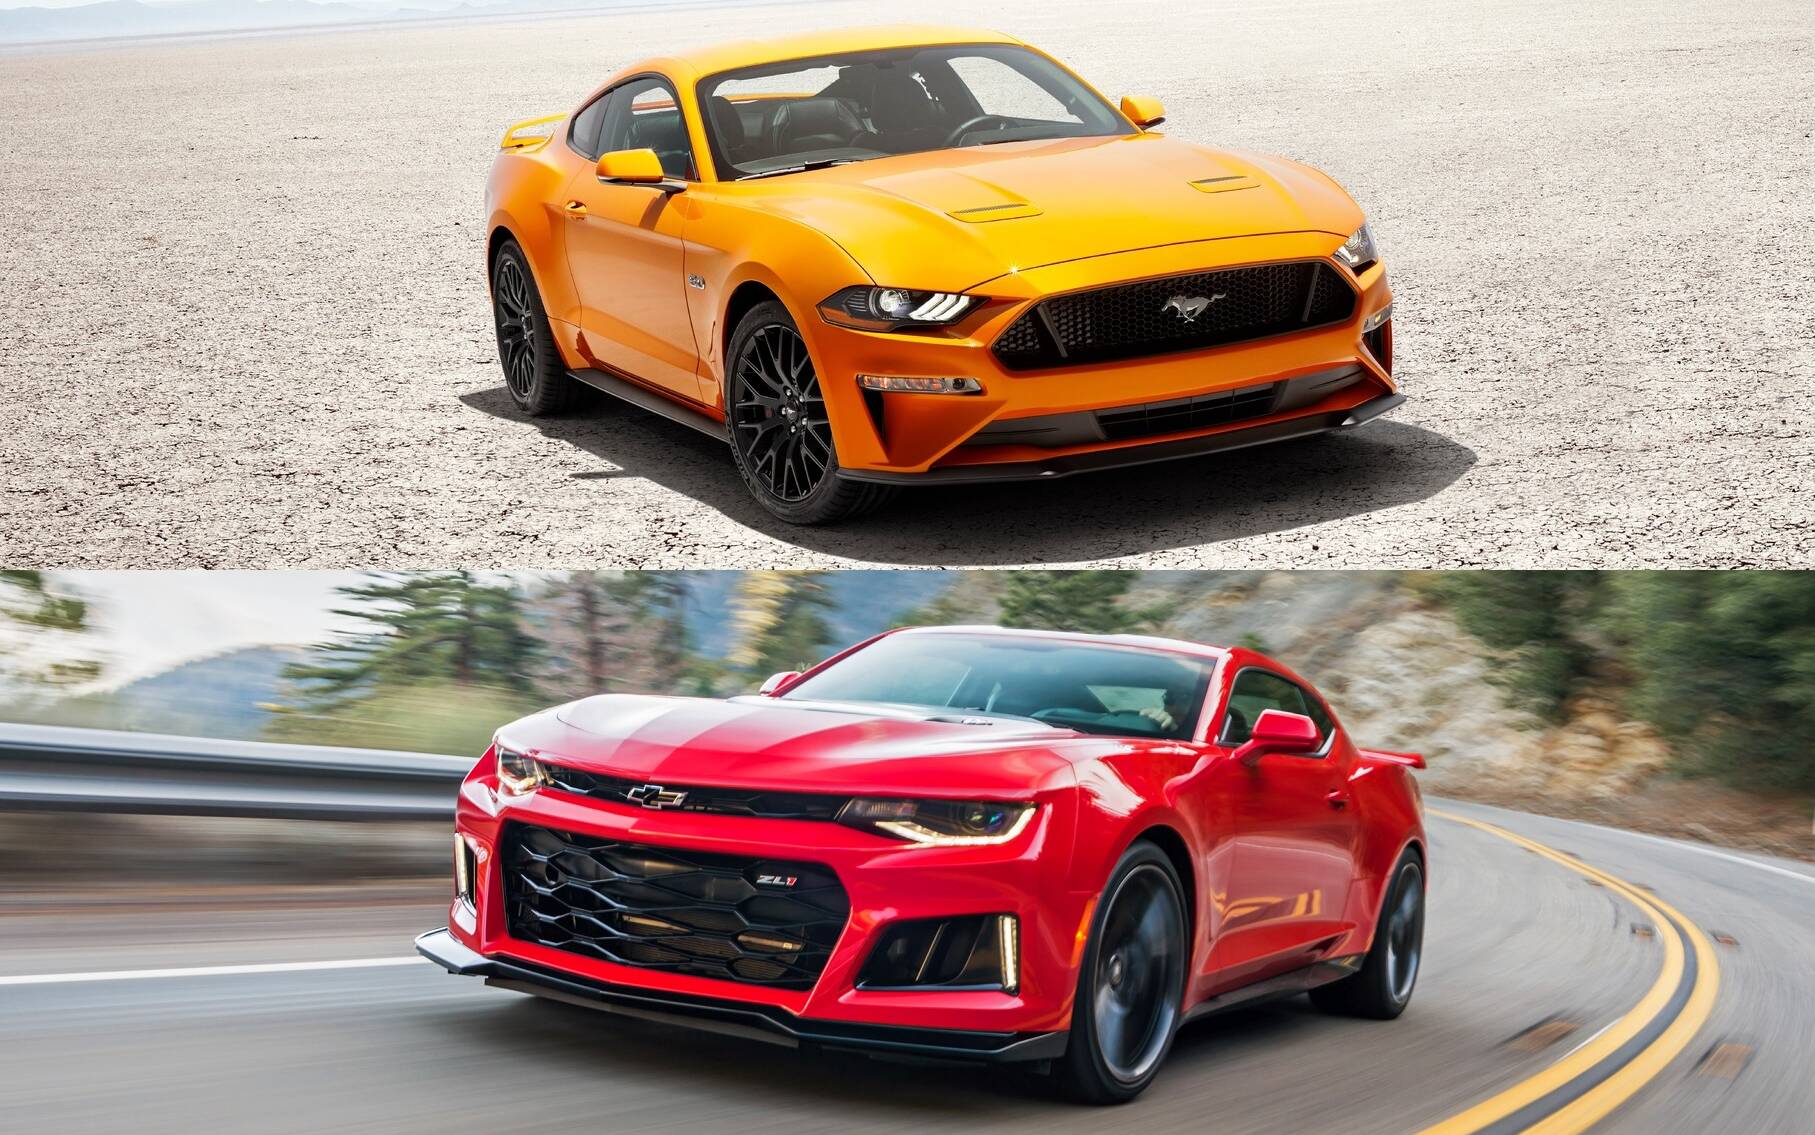 Ford Mustang ou Chevrolet Camaro d’occasion laquelle choisir? Otogo